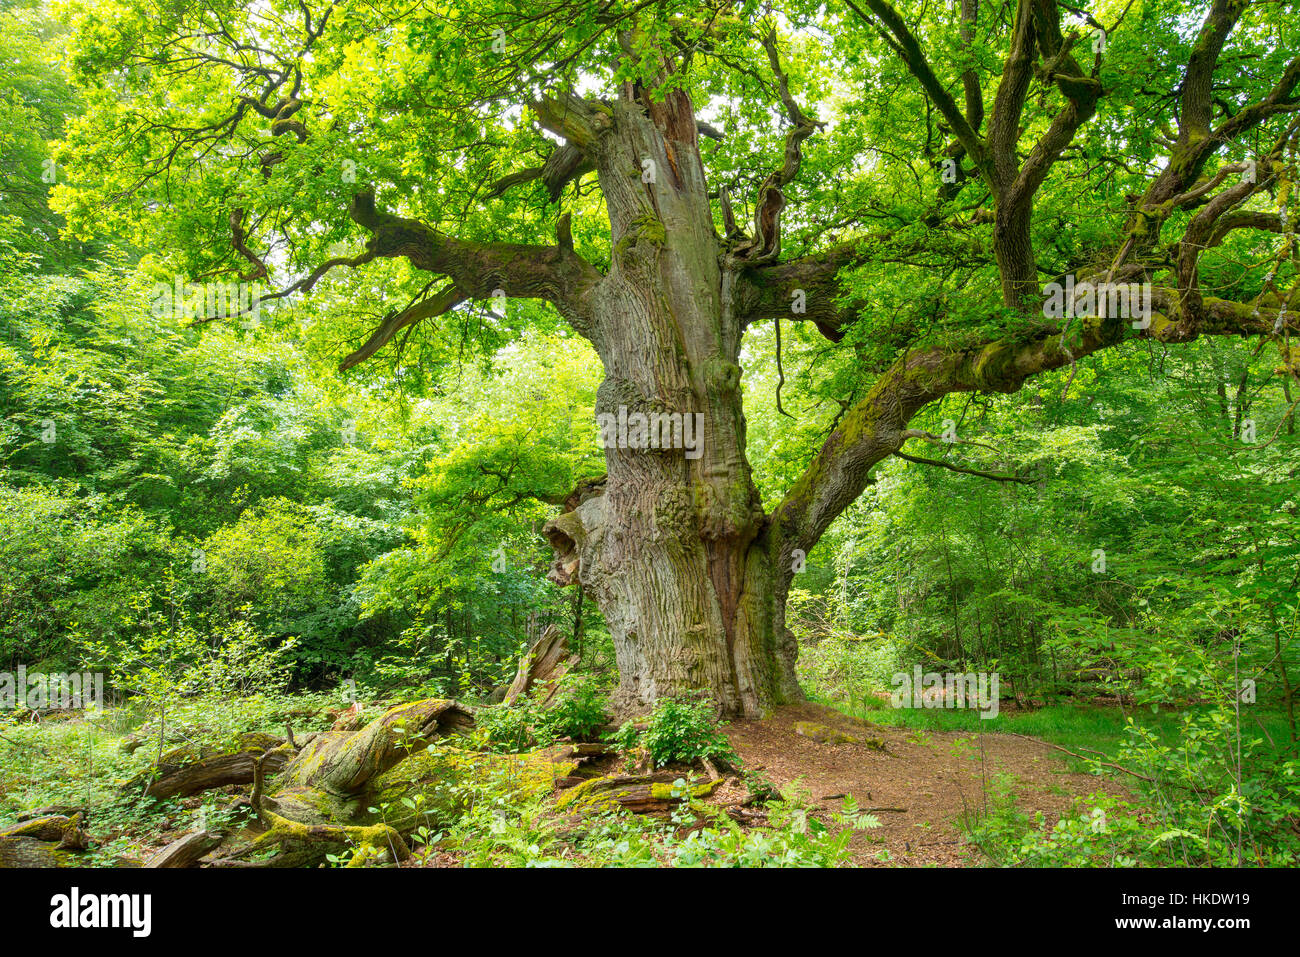 Old English oak (Quercus robur), Huteeiche, Hesse, Germany Stock Photo